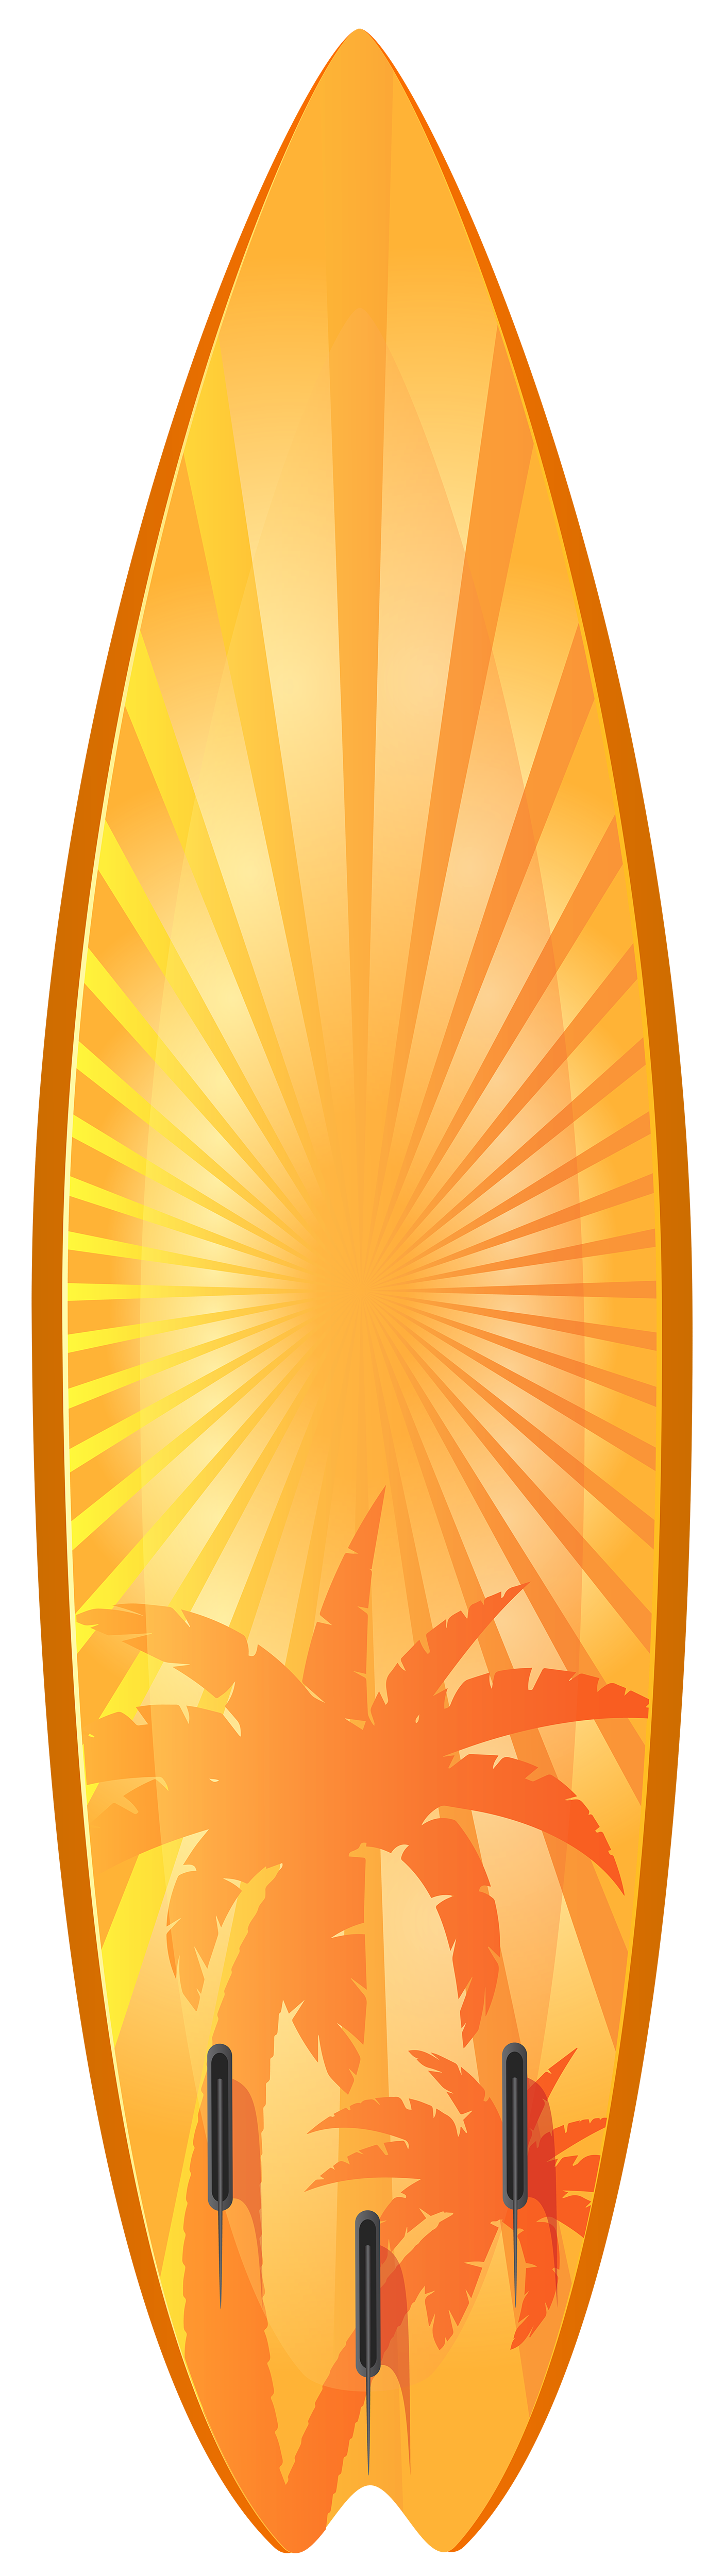 Surfing Surfboard Trees Palm Orange With Transparent Clipart